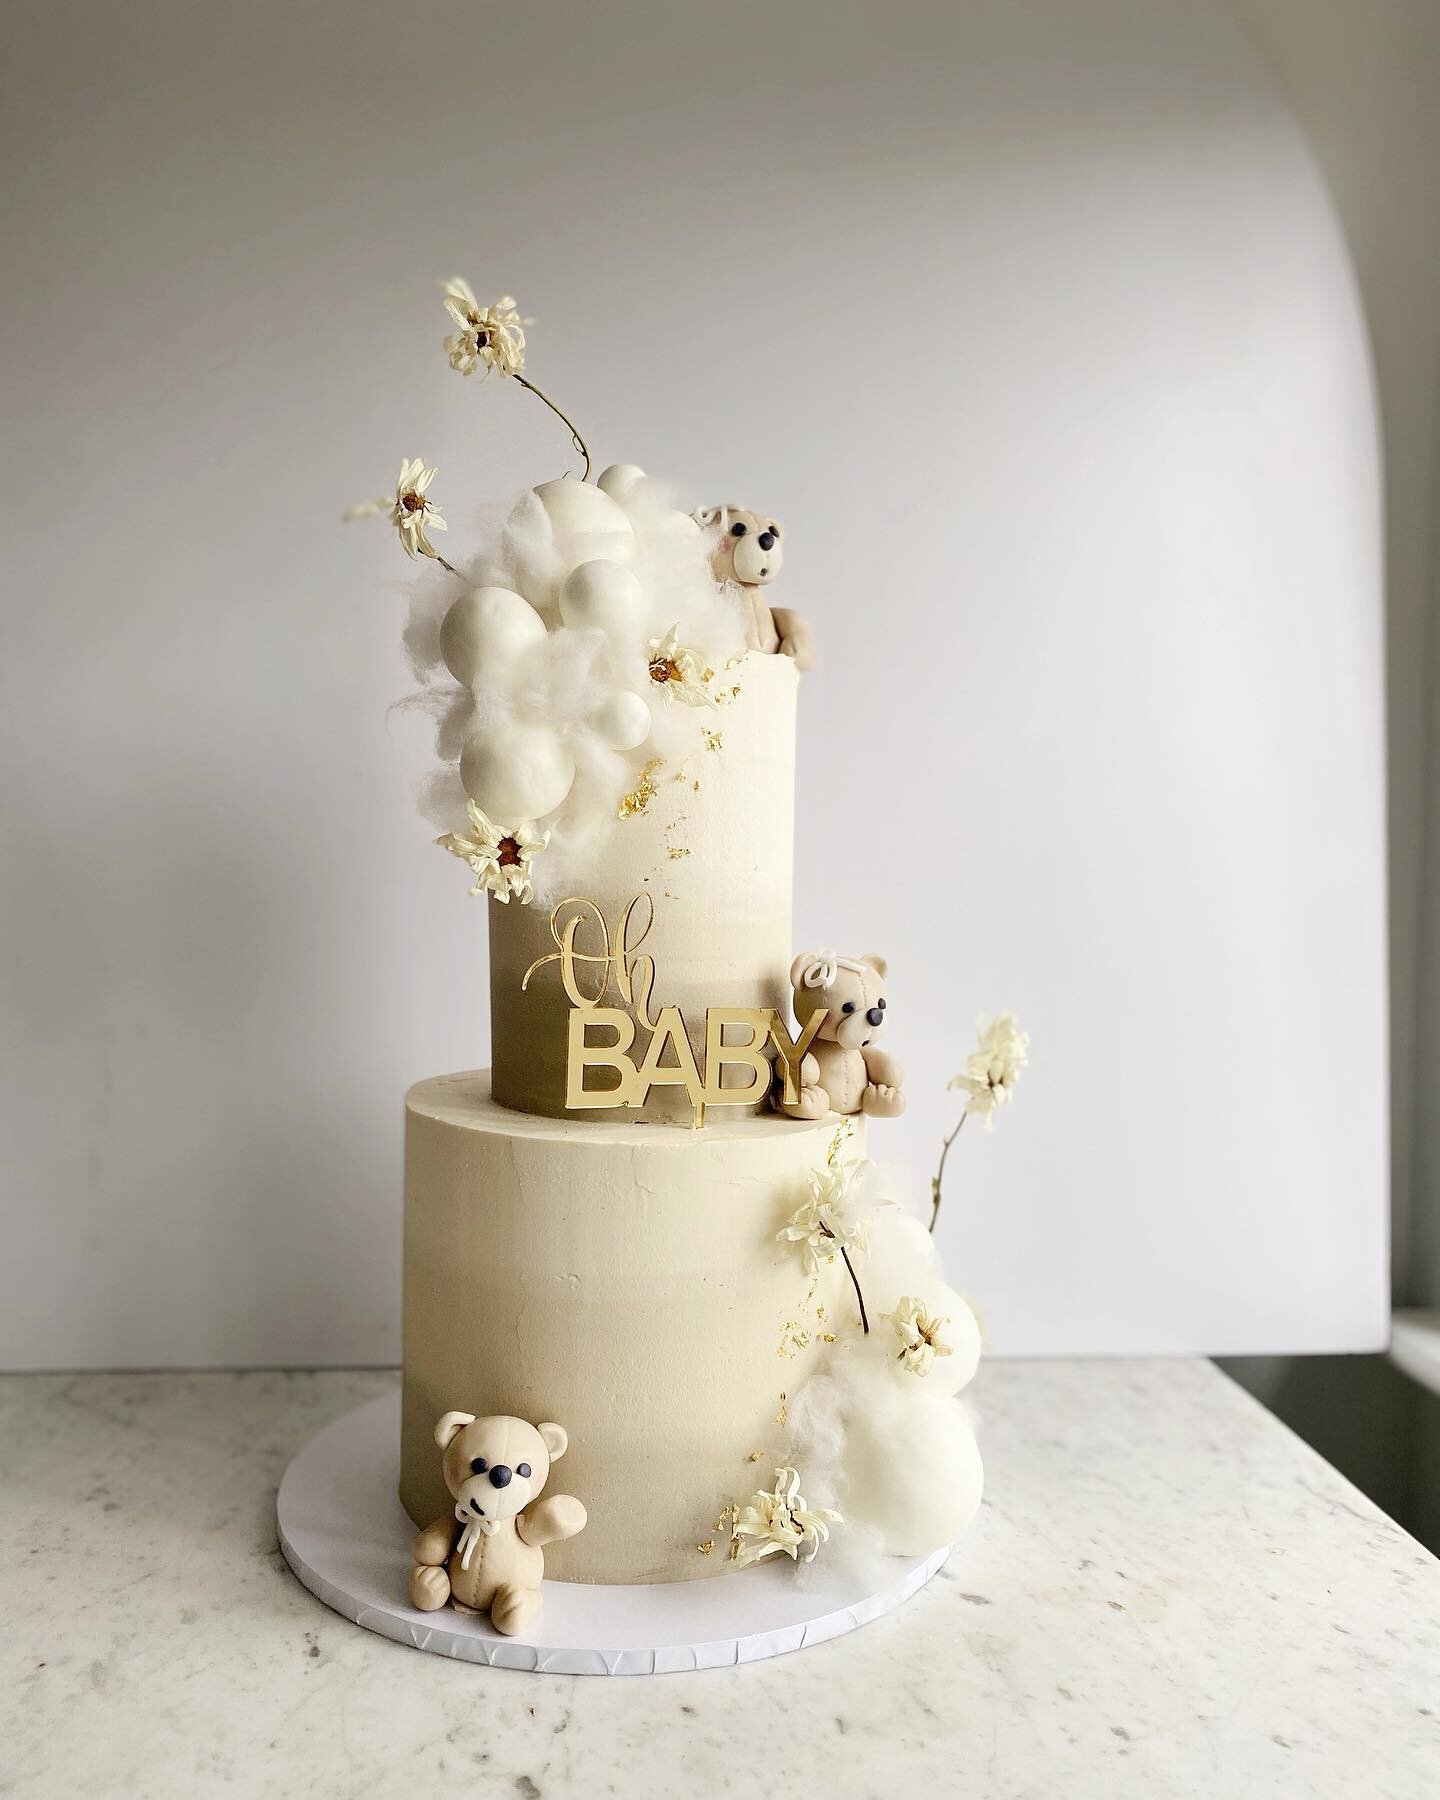 The MOST gorgeous neutral baby shower cake with handmade cutie bears 🐻 made by me 😃 
.
.
.
.
.
#babyshower #babyshowercake #neutralbabyshower #fondantbear #cottoncloud #ombrebuttercream #ombrecake #cakesoftheday #weddingcake #nottinghamcakes #grant